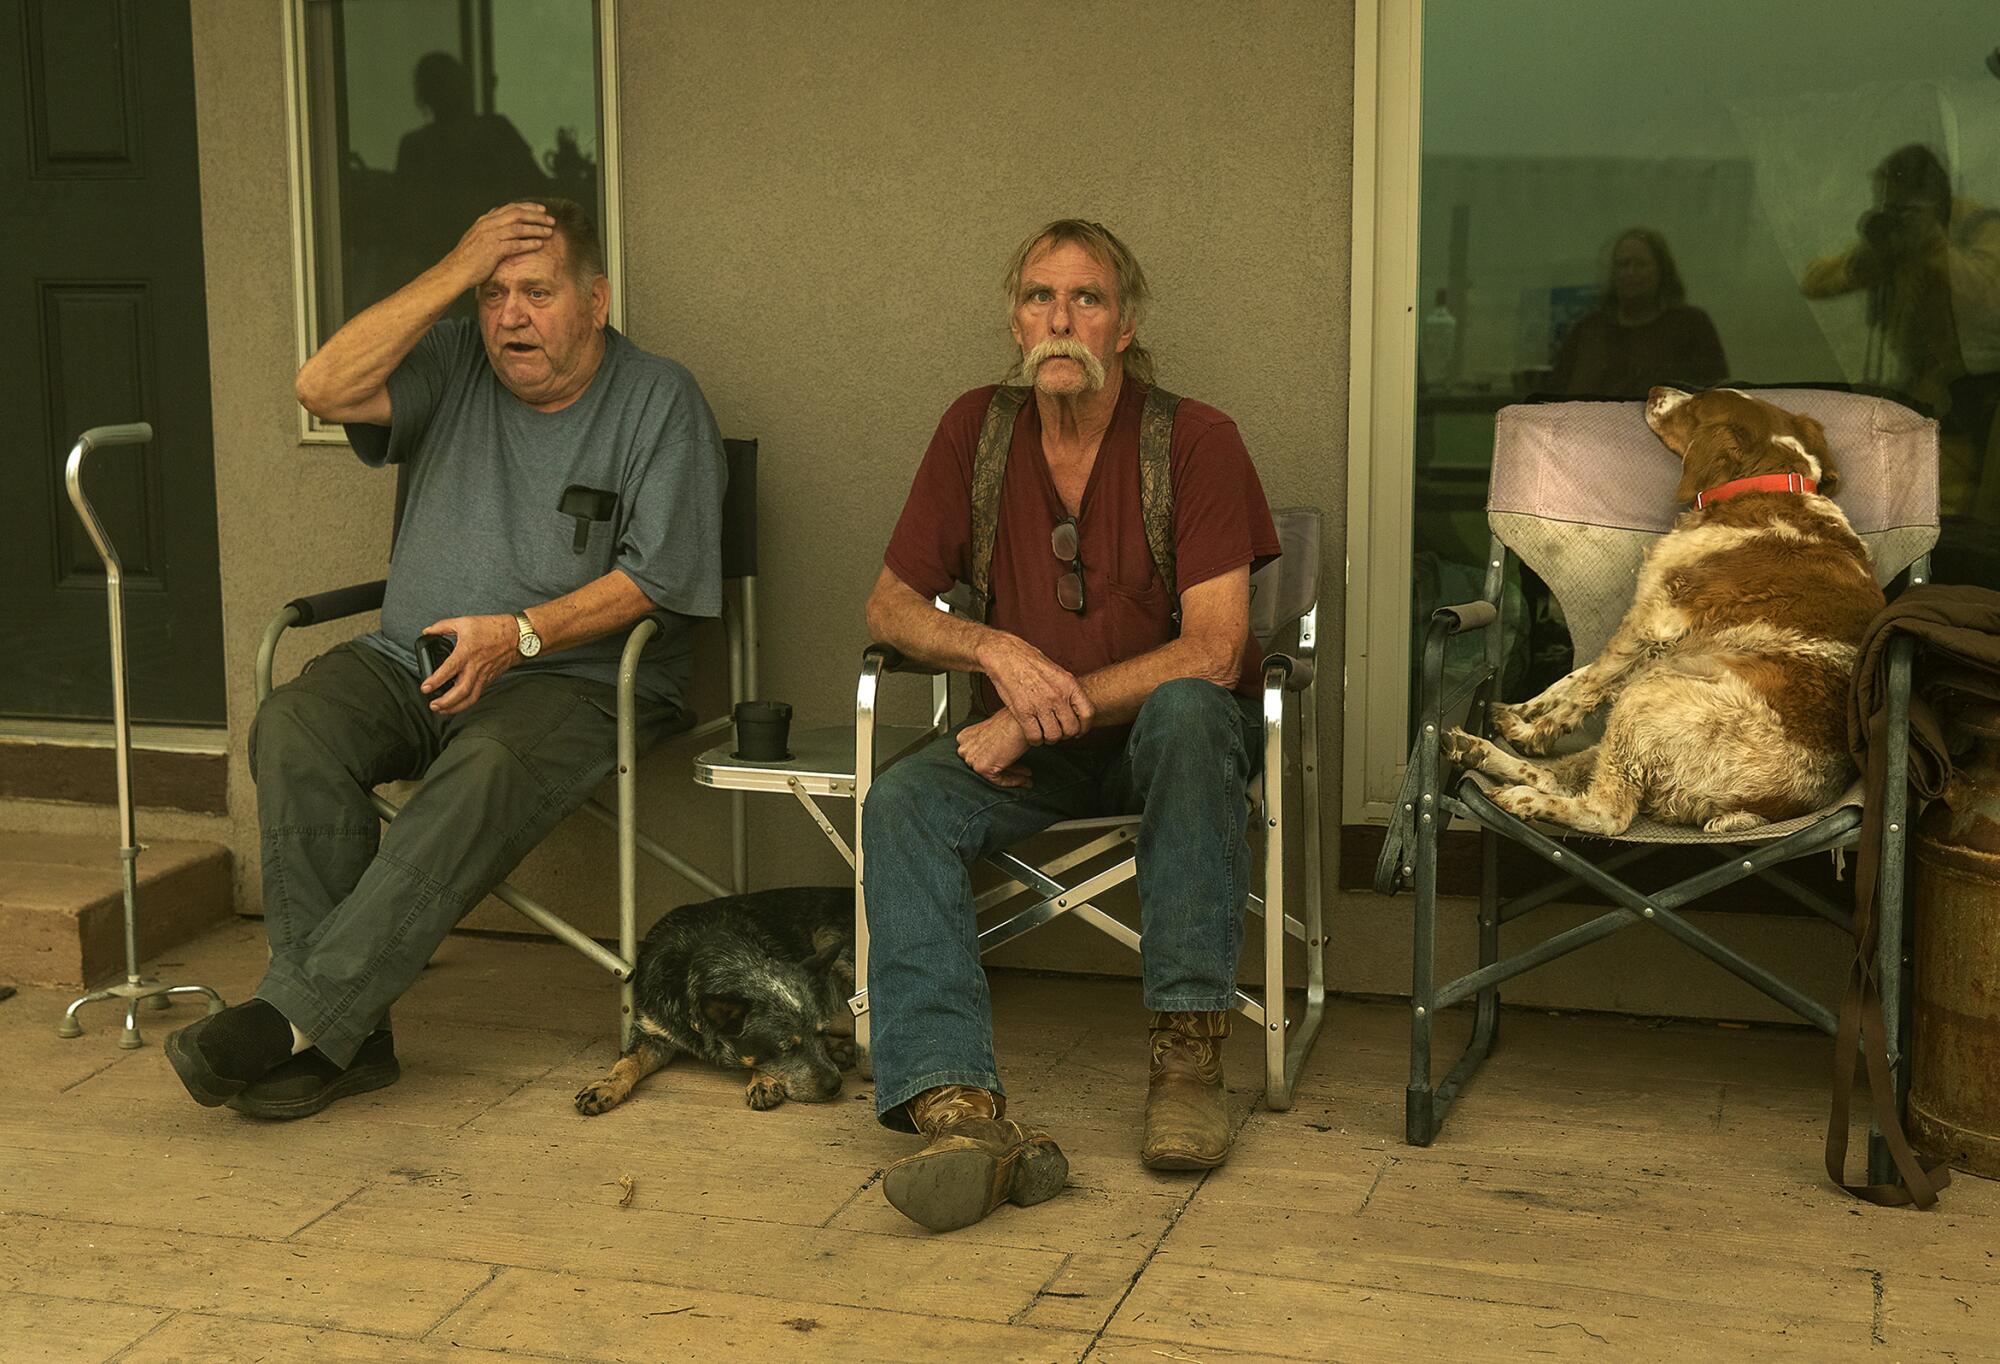 Greenville residents Gould Fickardt and Woody Hovland sit with their dogs outside a friend’s home.